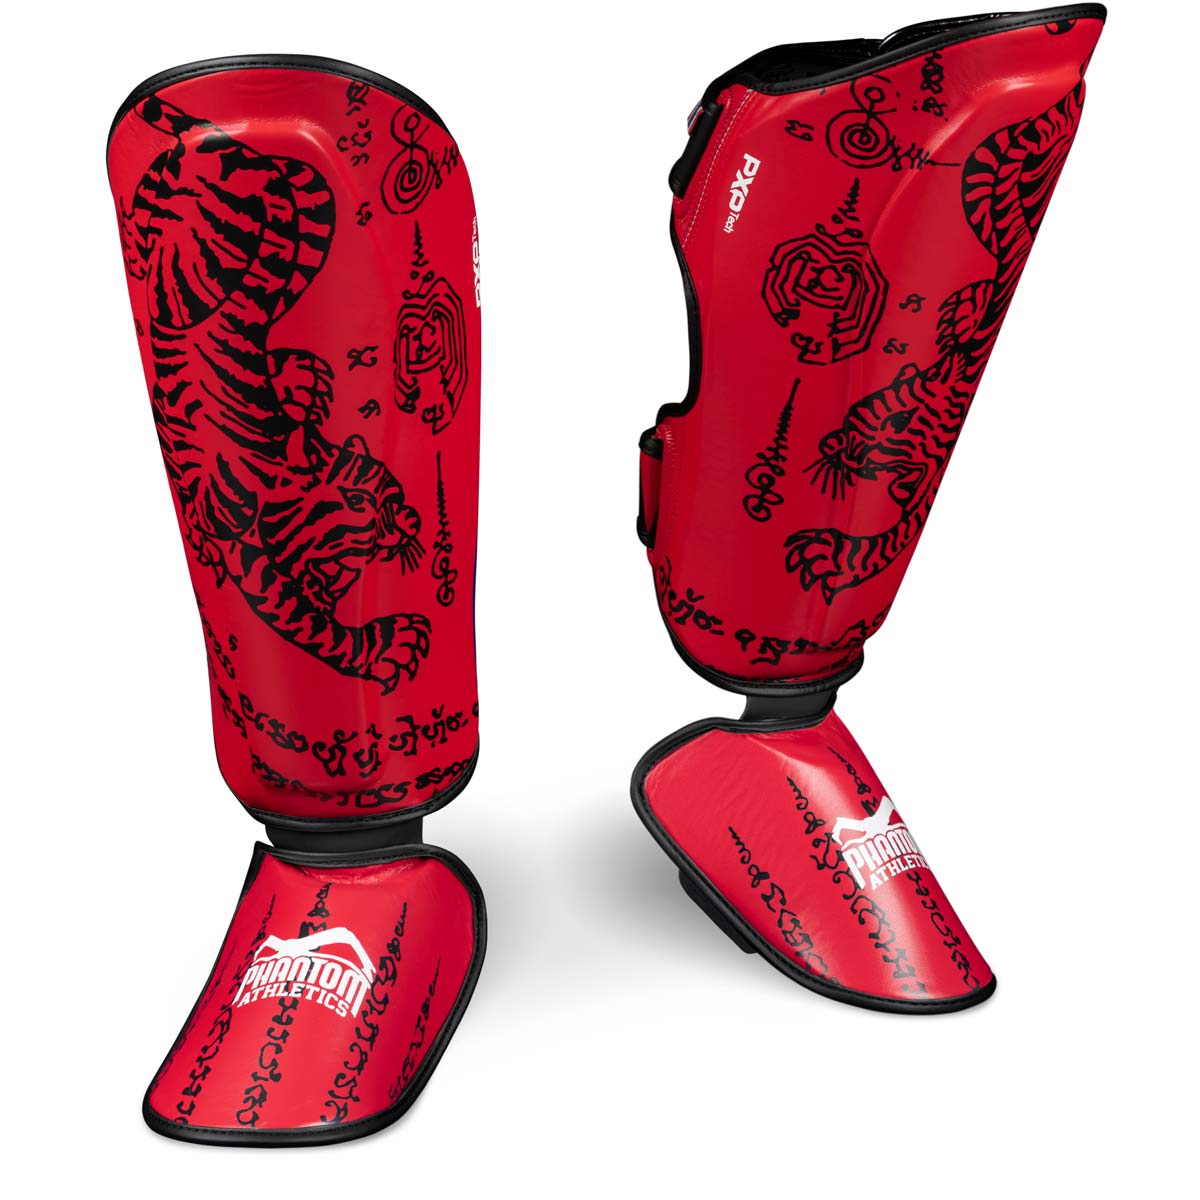 Phantom Muay Thai shin guard for Thai boxing and MMA sparring, competition and training. In the traditional Sak Yant design and the color red.